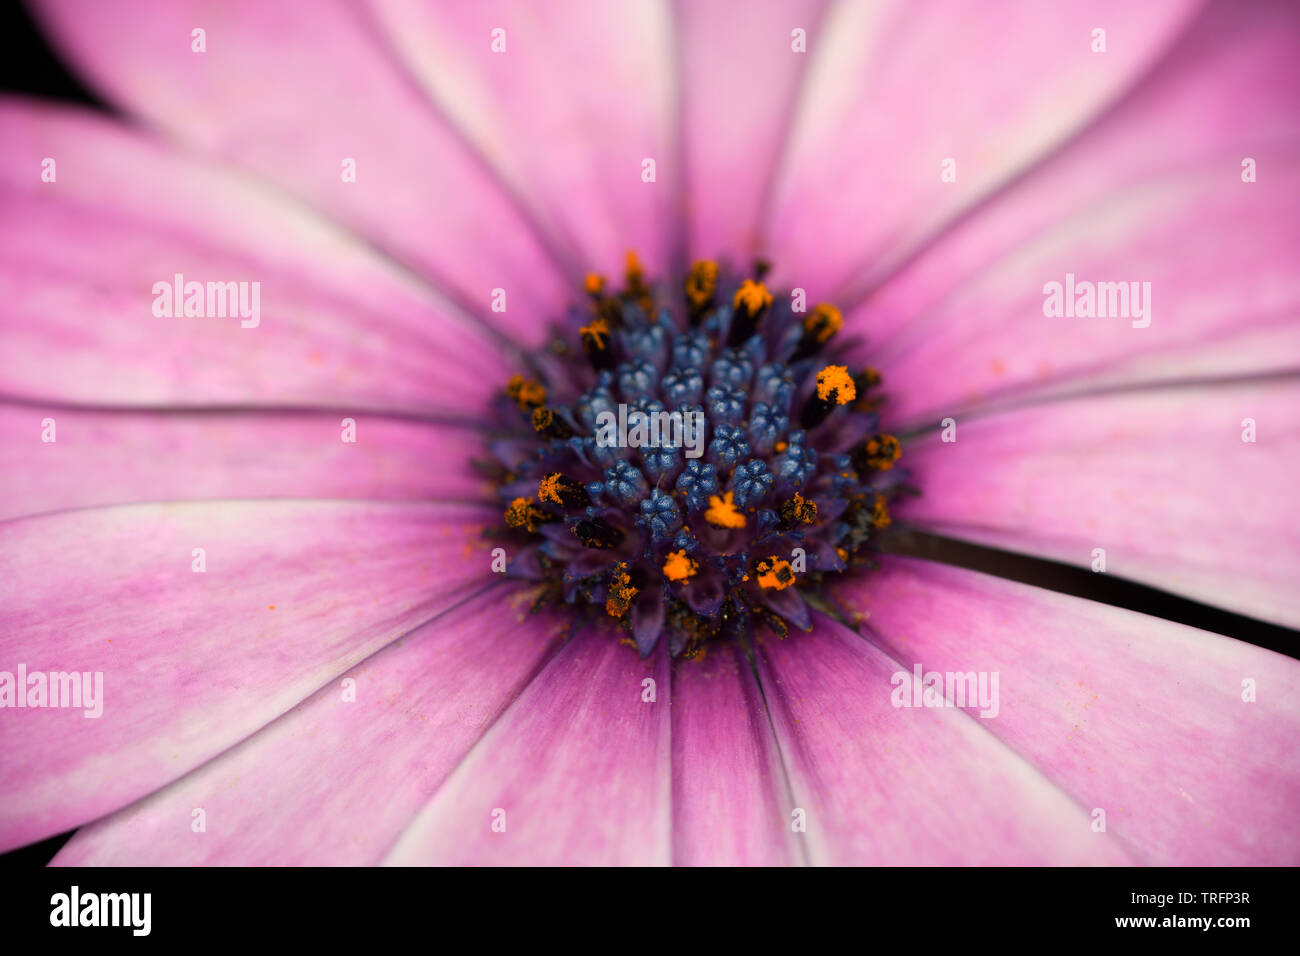 Pink petals and Purple disk floret of African Daisy Osteospermum flower close up Stock Photo